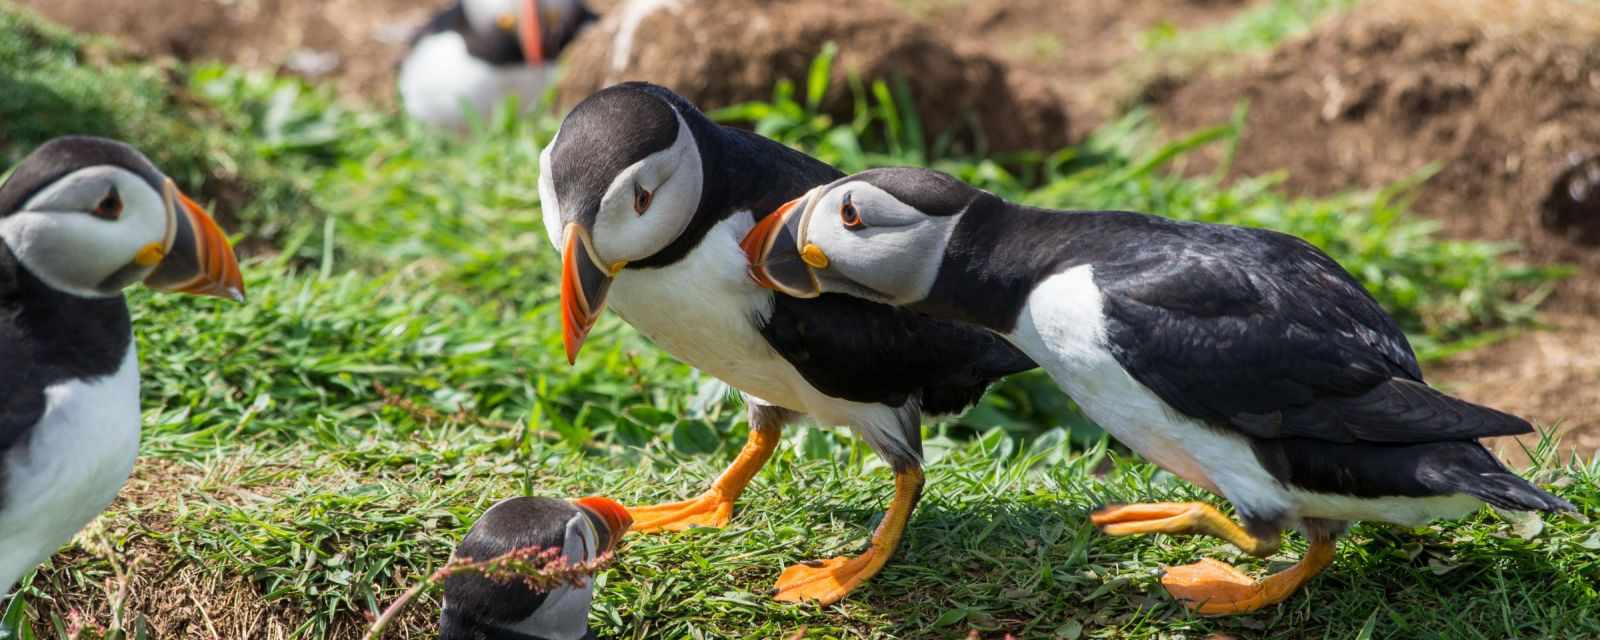 Puffins in burrows and playing